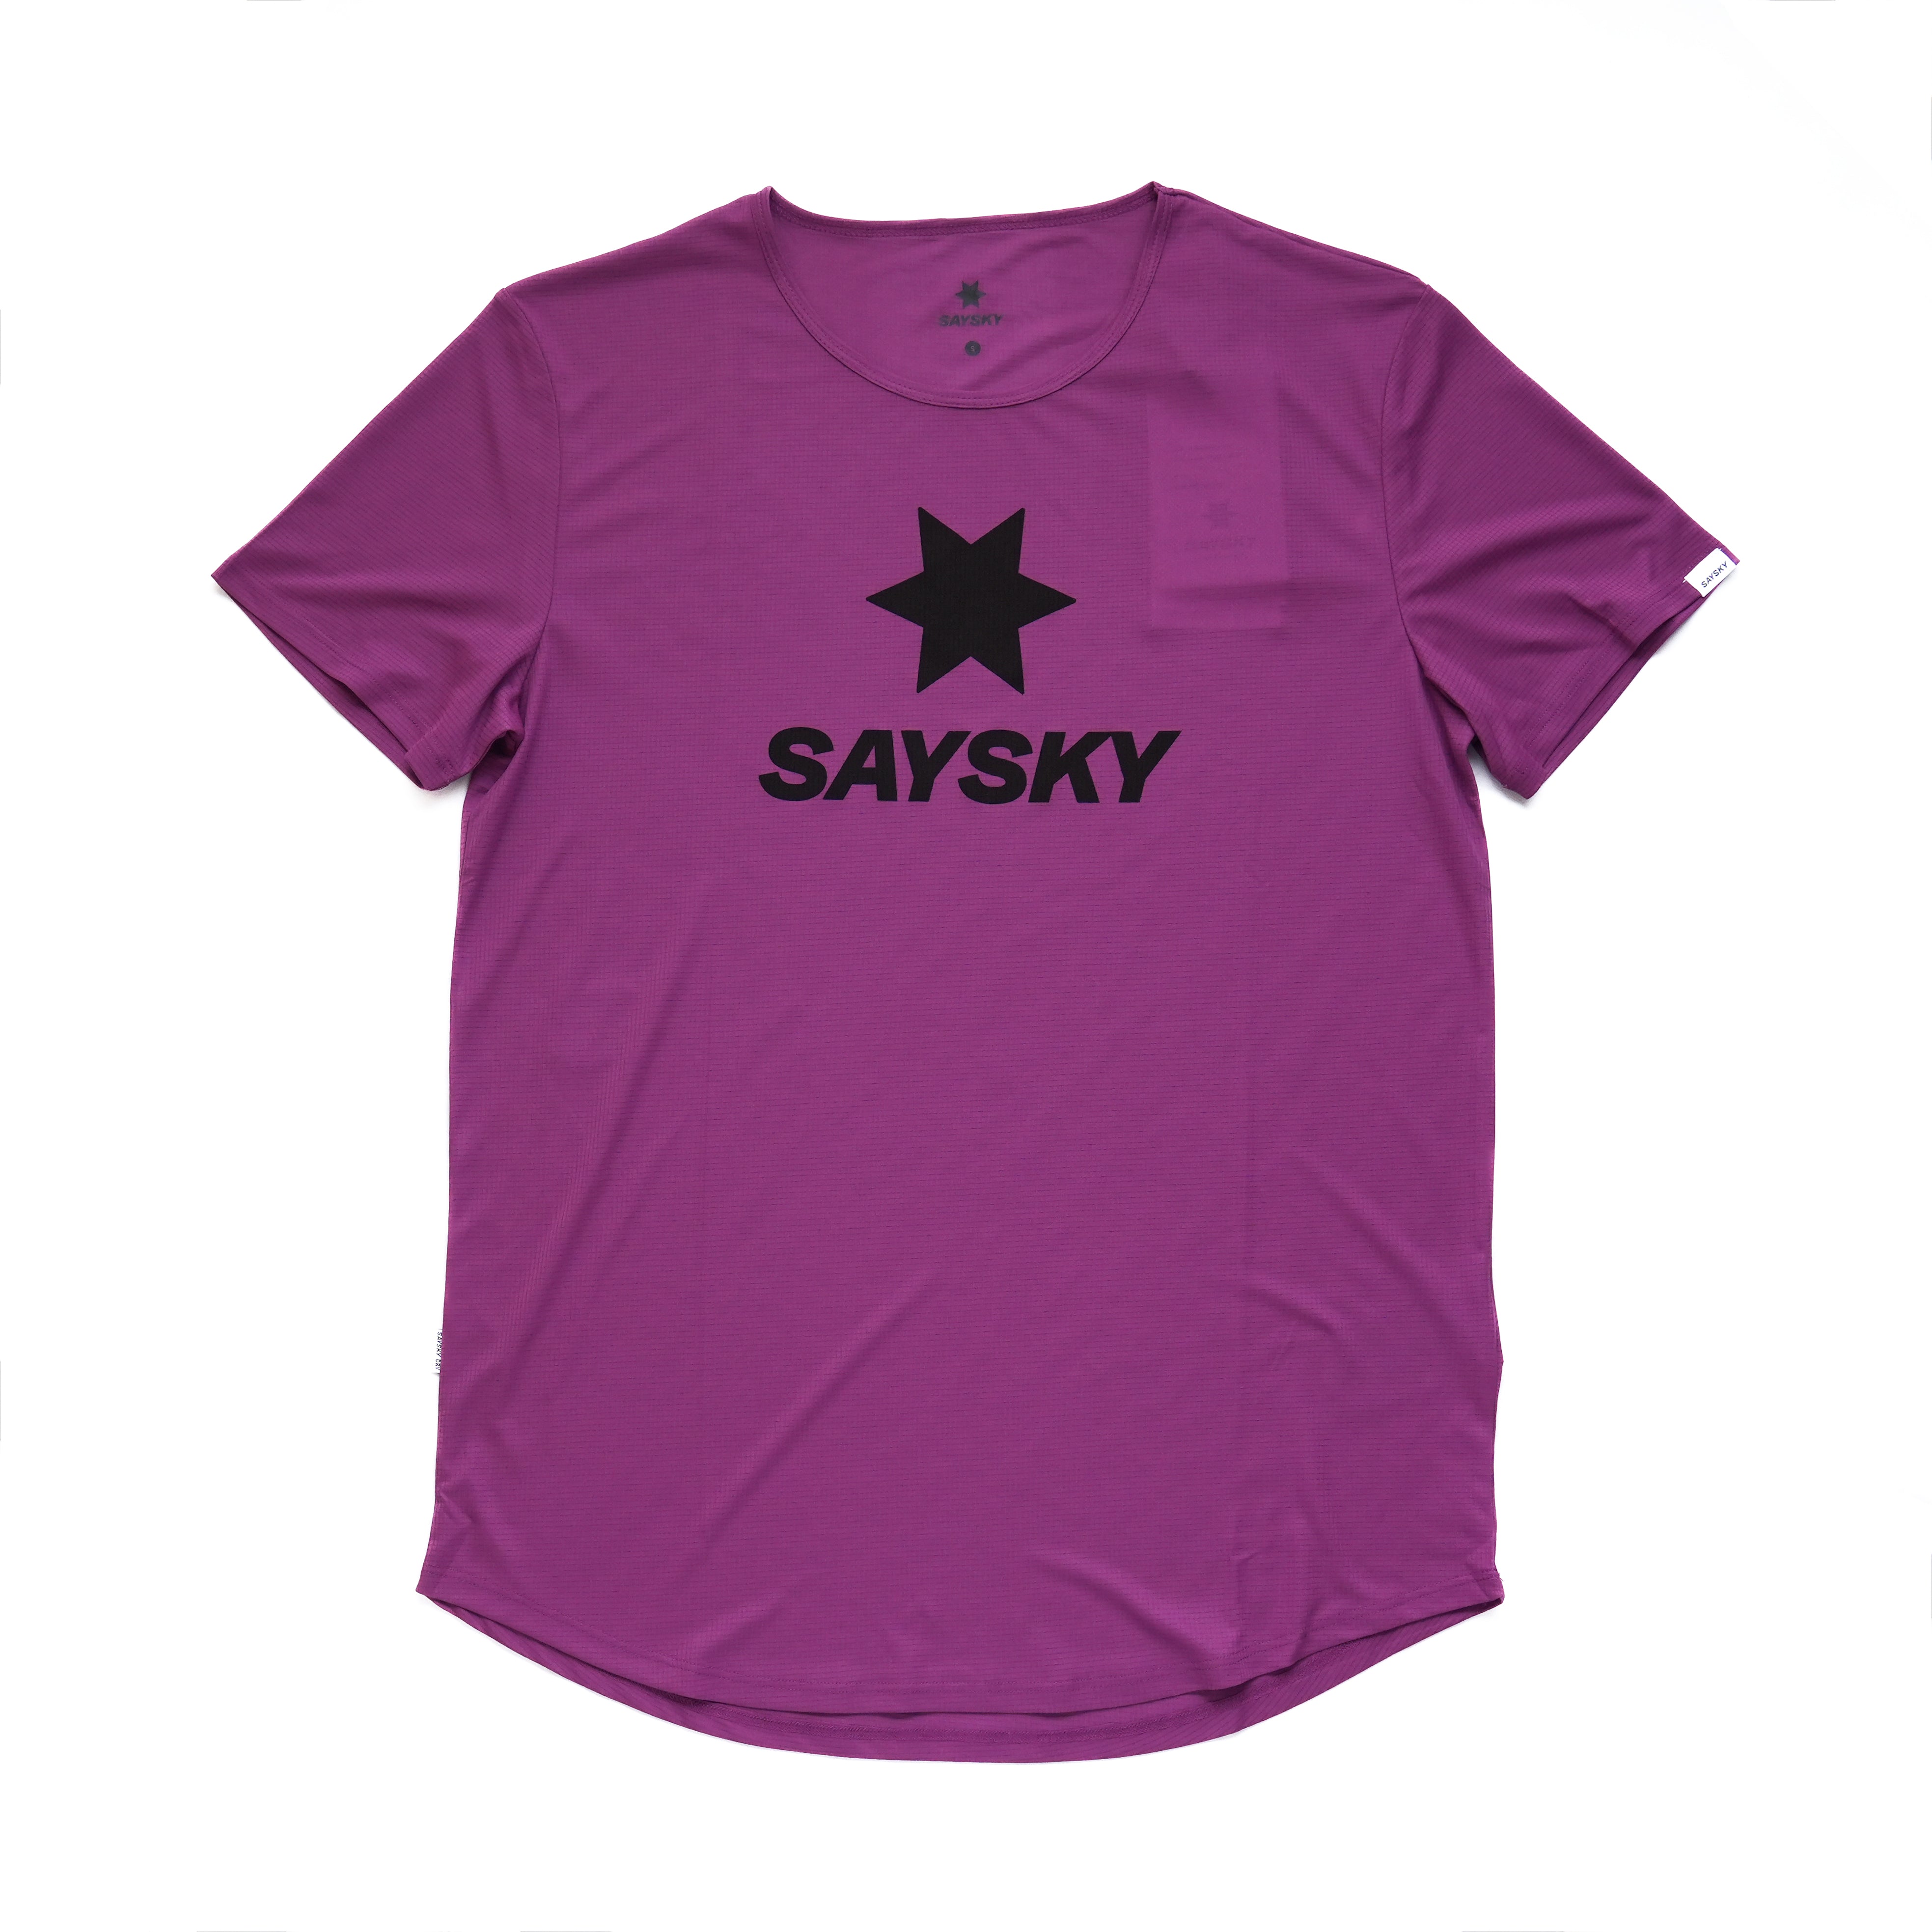 SAYSKY – CONNECTED